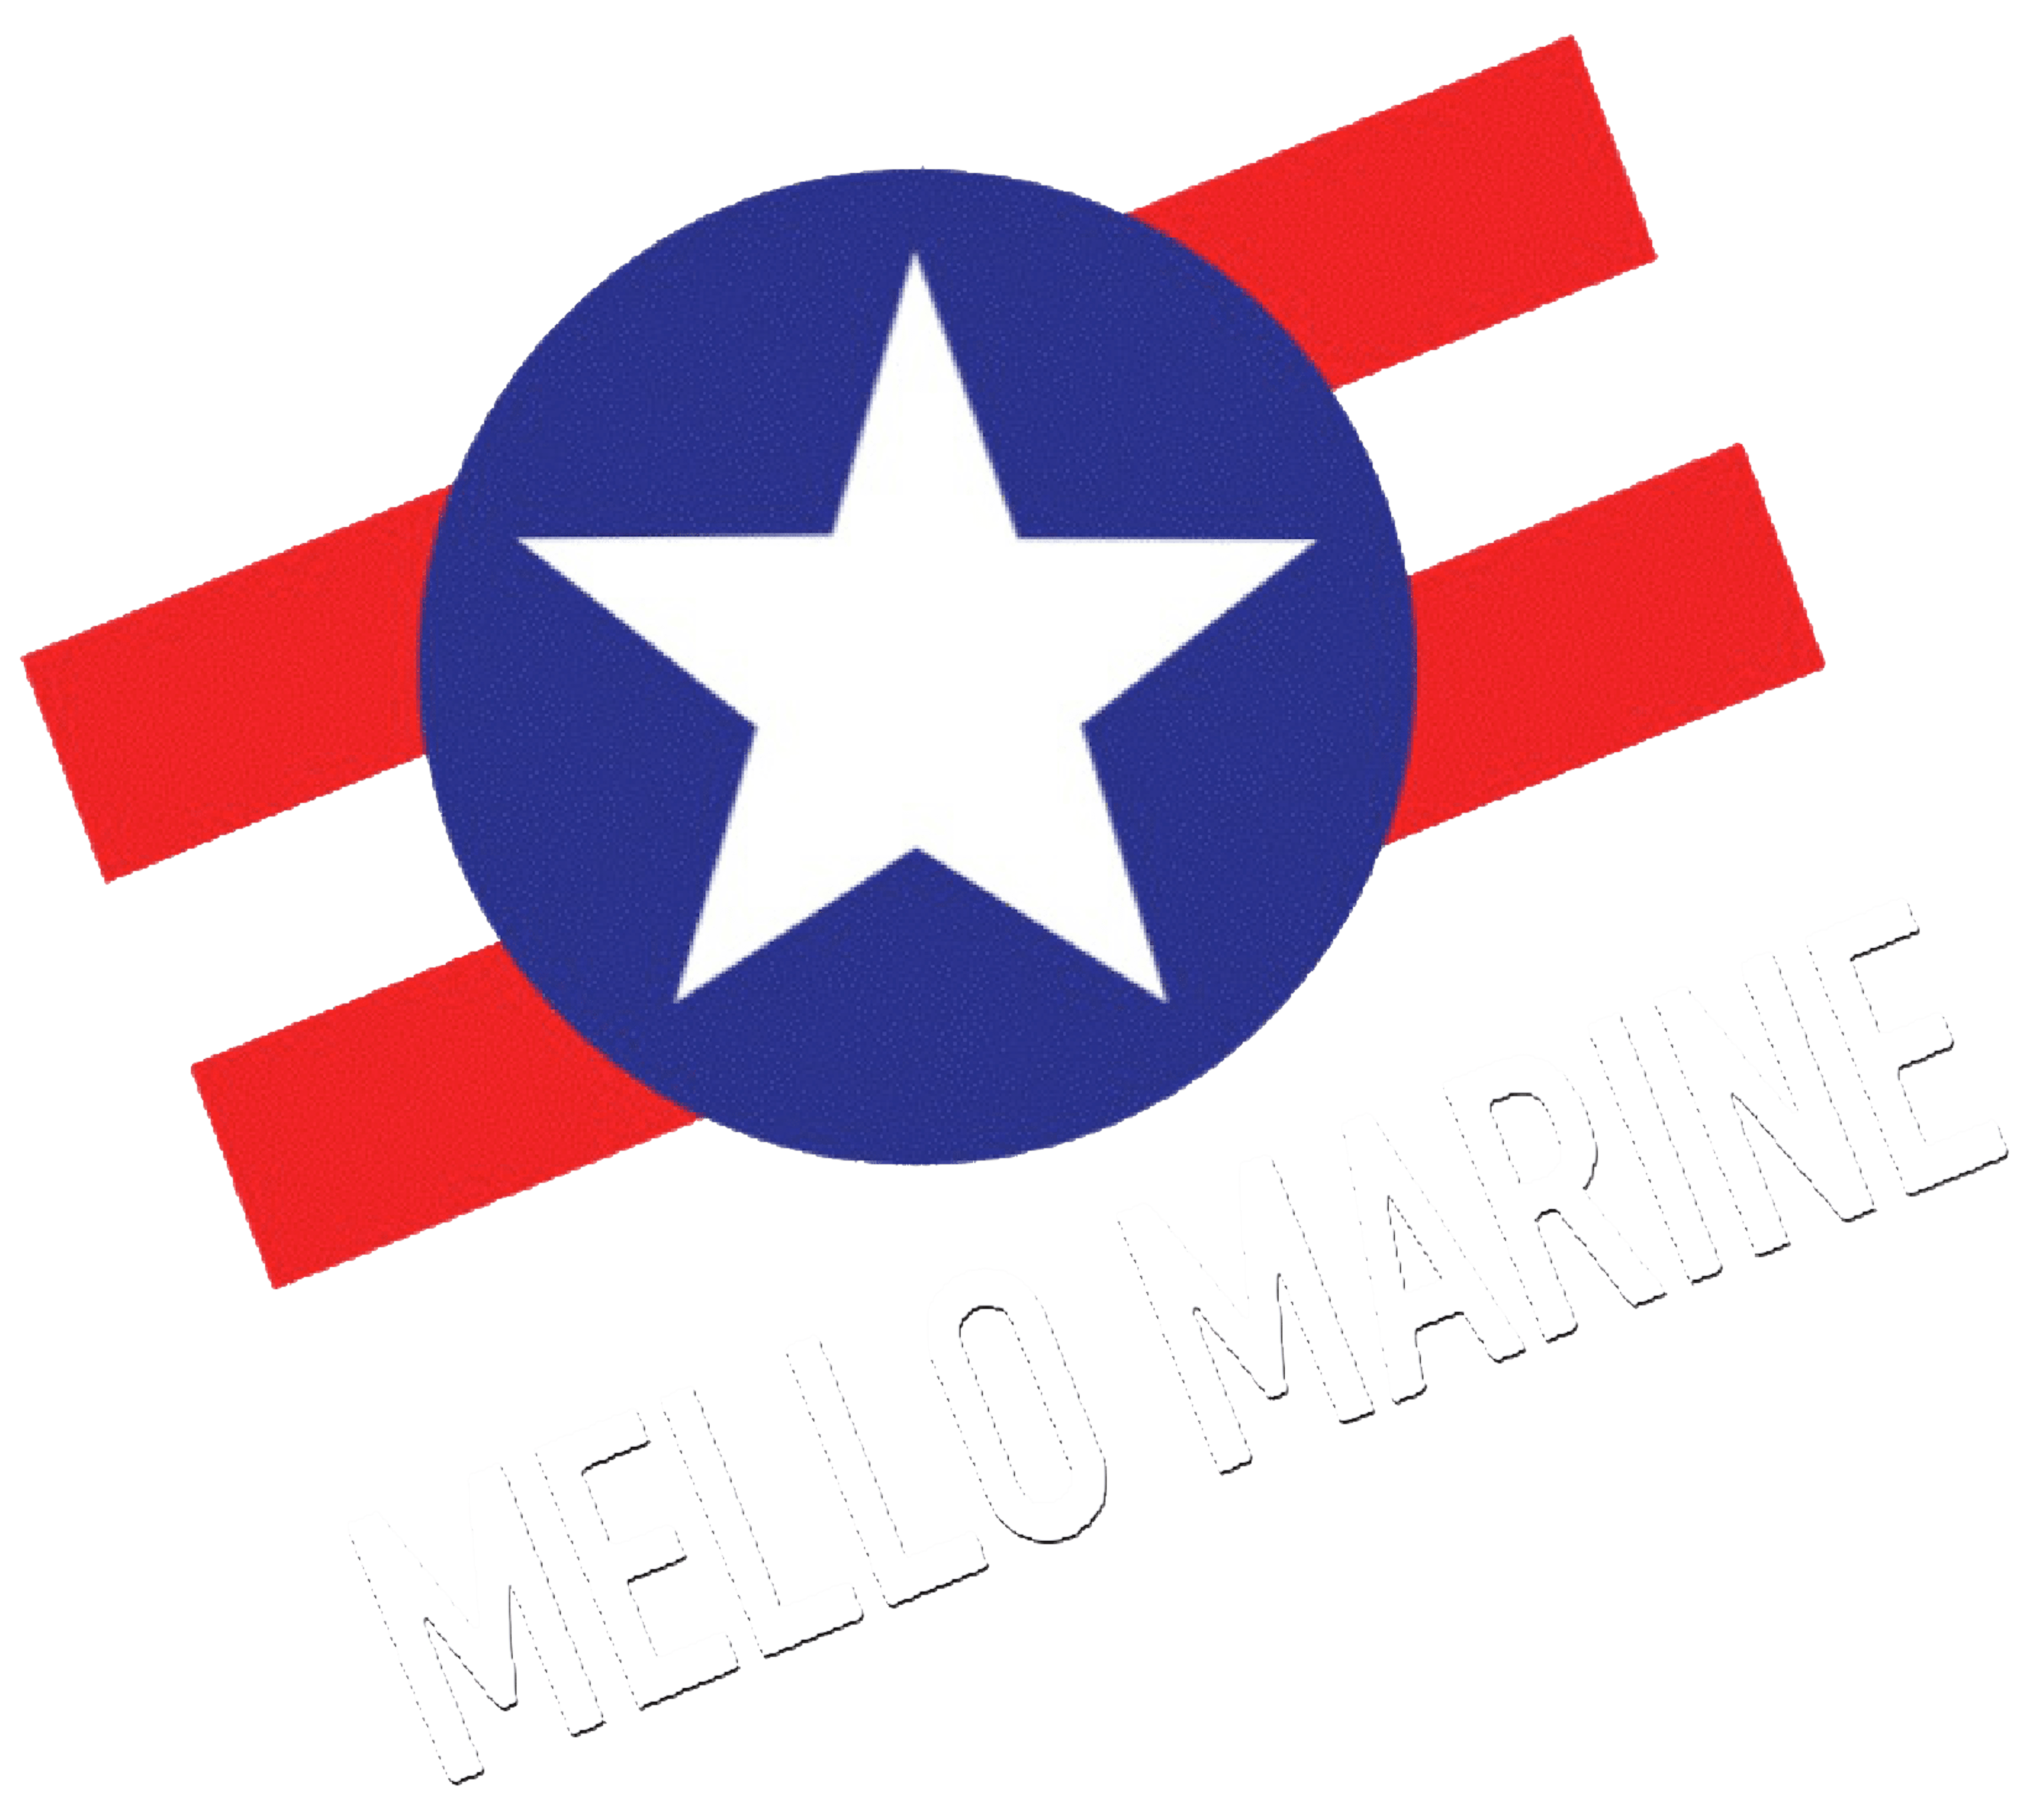 The logo for melo marine, capturing the essence of 